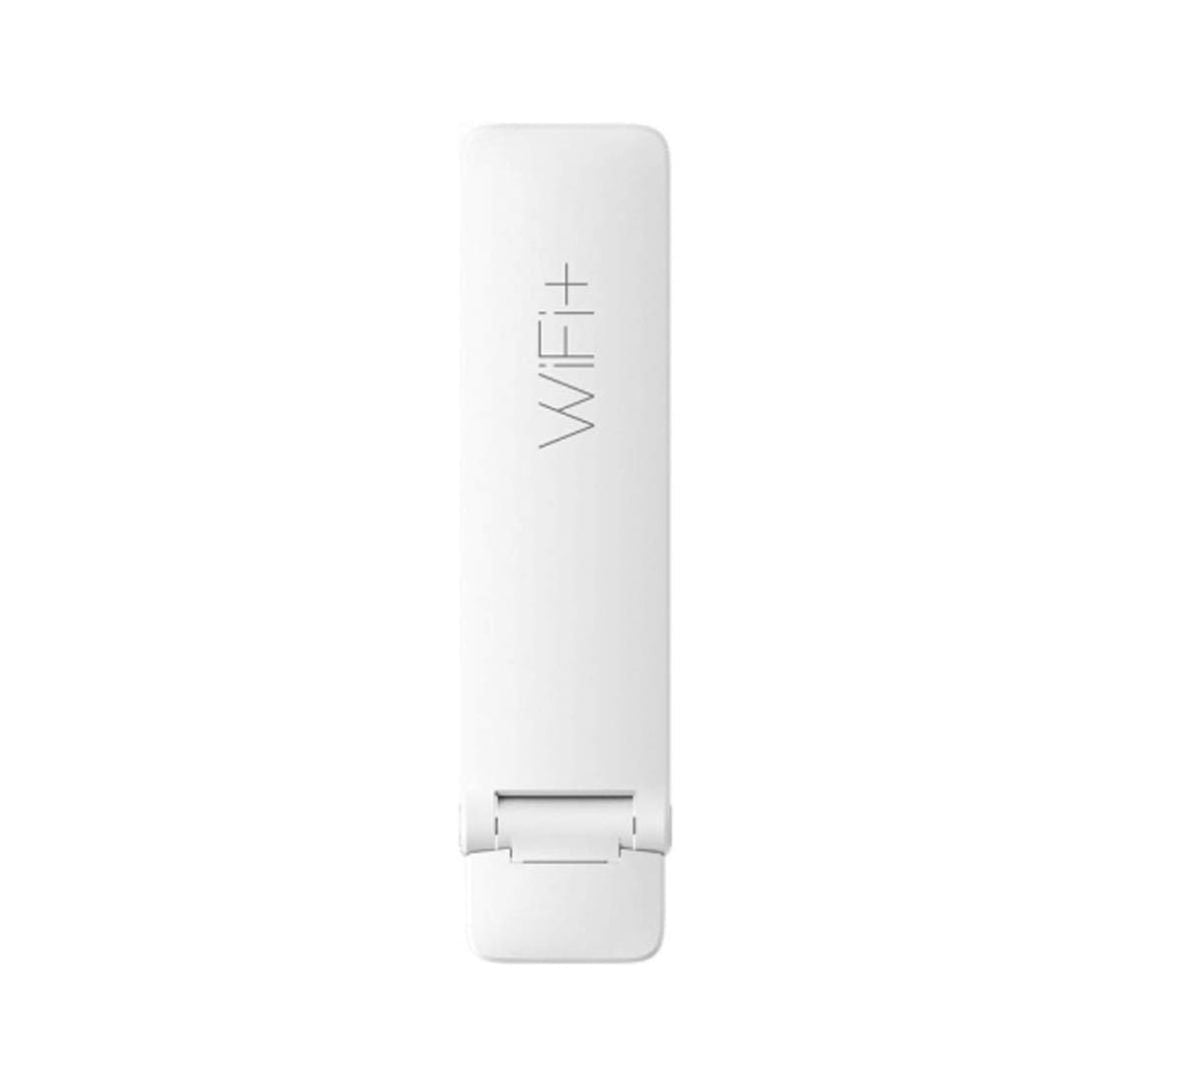 41Kwa832Fql. Ac Sl1000 Xiaomi The Xiaomi Wifi Repeater Has The Ability To Connect Up To 16 Devices At One Time Without Compromising The Speed Of Connectively. Enhances Wi-Fi Signal For Lag-Free Streaming And Gaming Etc With No Need To Switch The Hotspot. Boosts The Coverage Of Your Existing Wi-Fi Signal Up To 2 Times. &Amp;Nbsp; Xiaomi Mi Wifi Repeater 2 - 300Mbps Wi-Fi Range Extender Amplifier (Wi-Fi Booster)